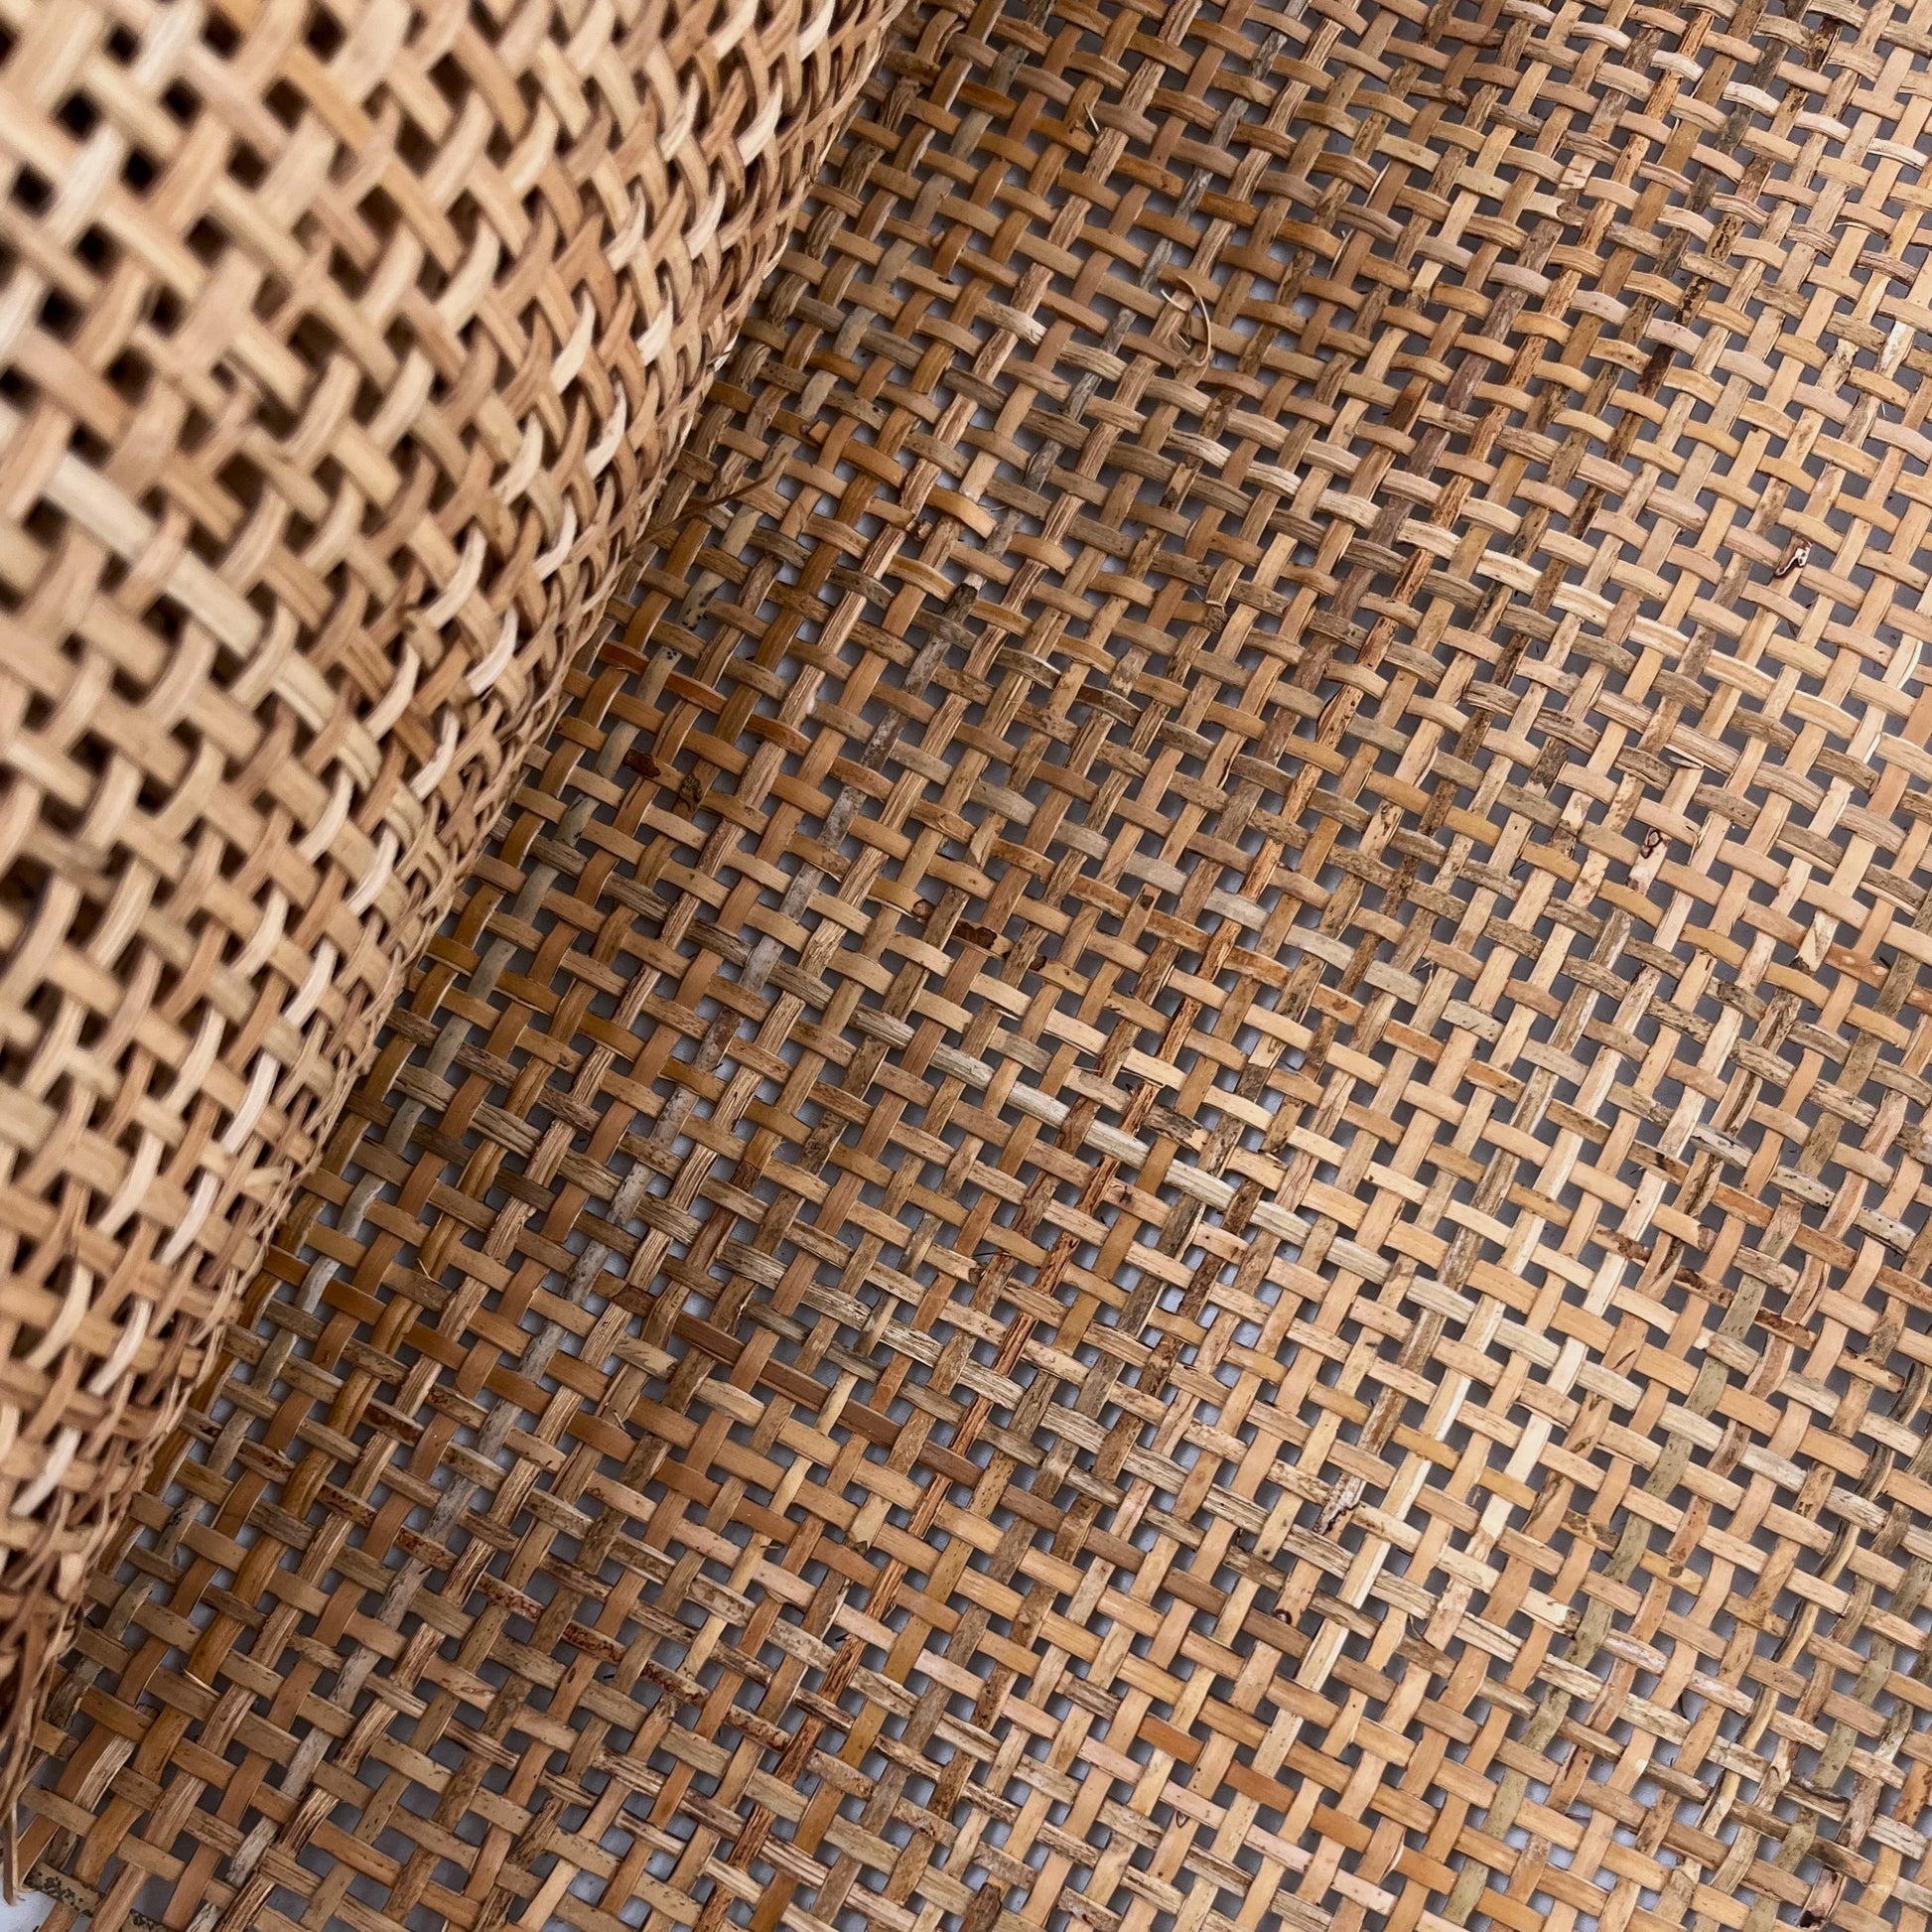 Rattan Cane Webbing Width 20'' Dark Natural Radio Rattan Cane Mesh Webbing  Roll/caning Material for Cane Furniture, Restoration and DIY -  Norway